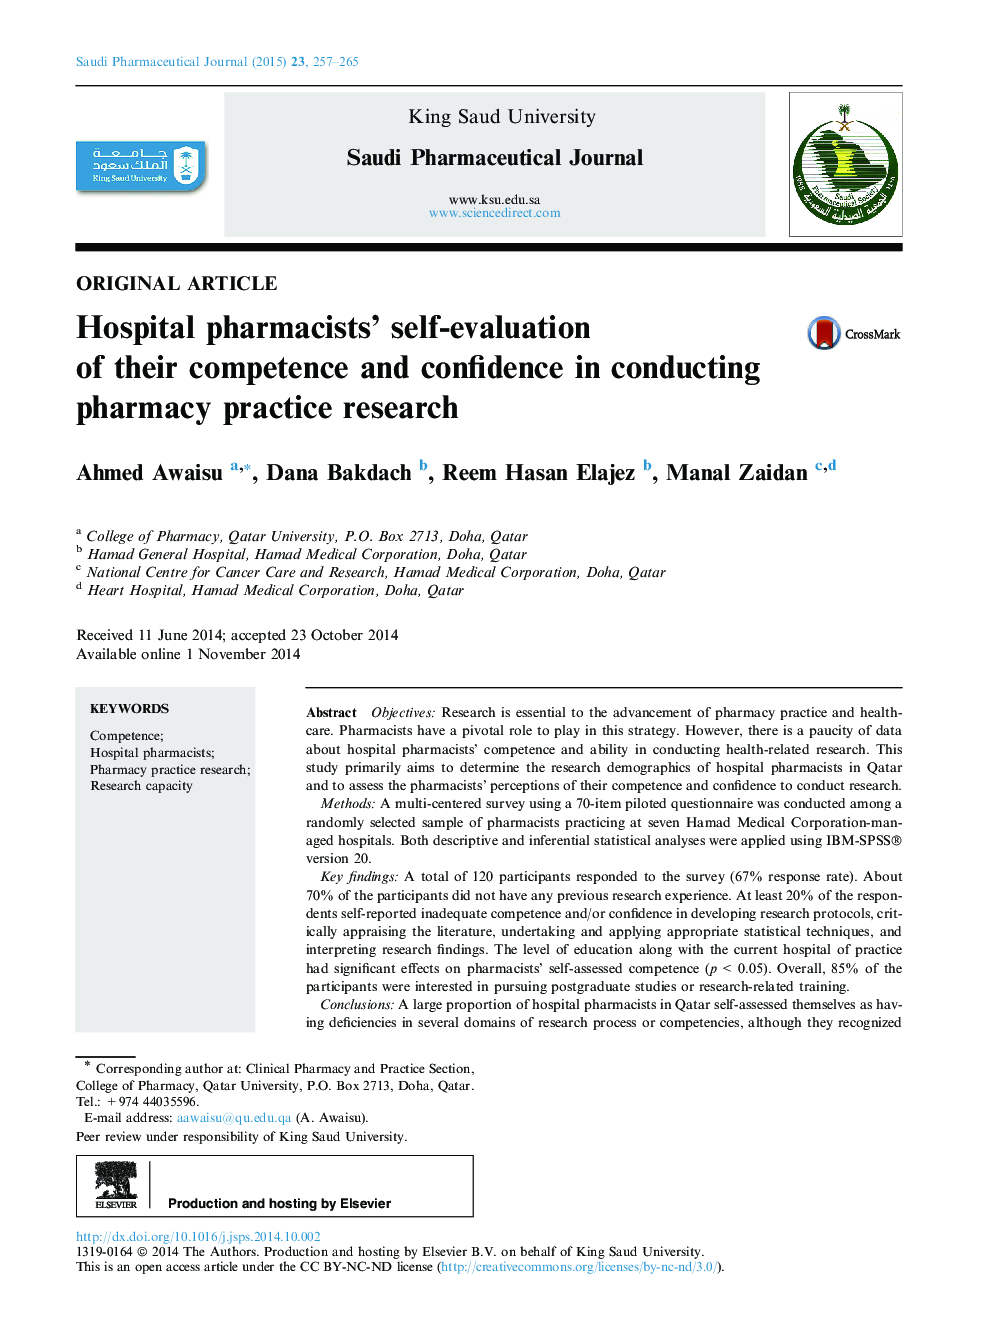 Hospital pharmacists’ self-evaluation of their competence and confidence in conducting pharmacy practice research 